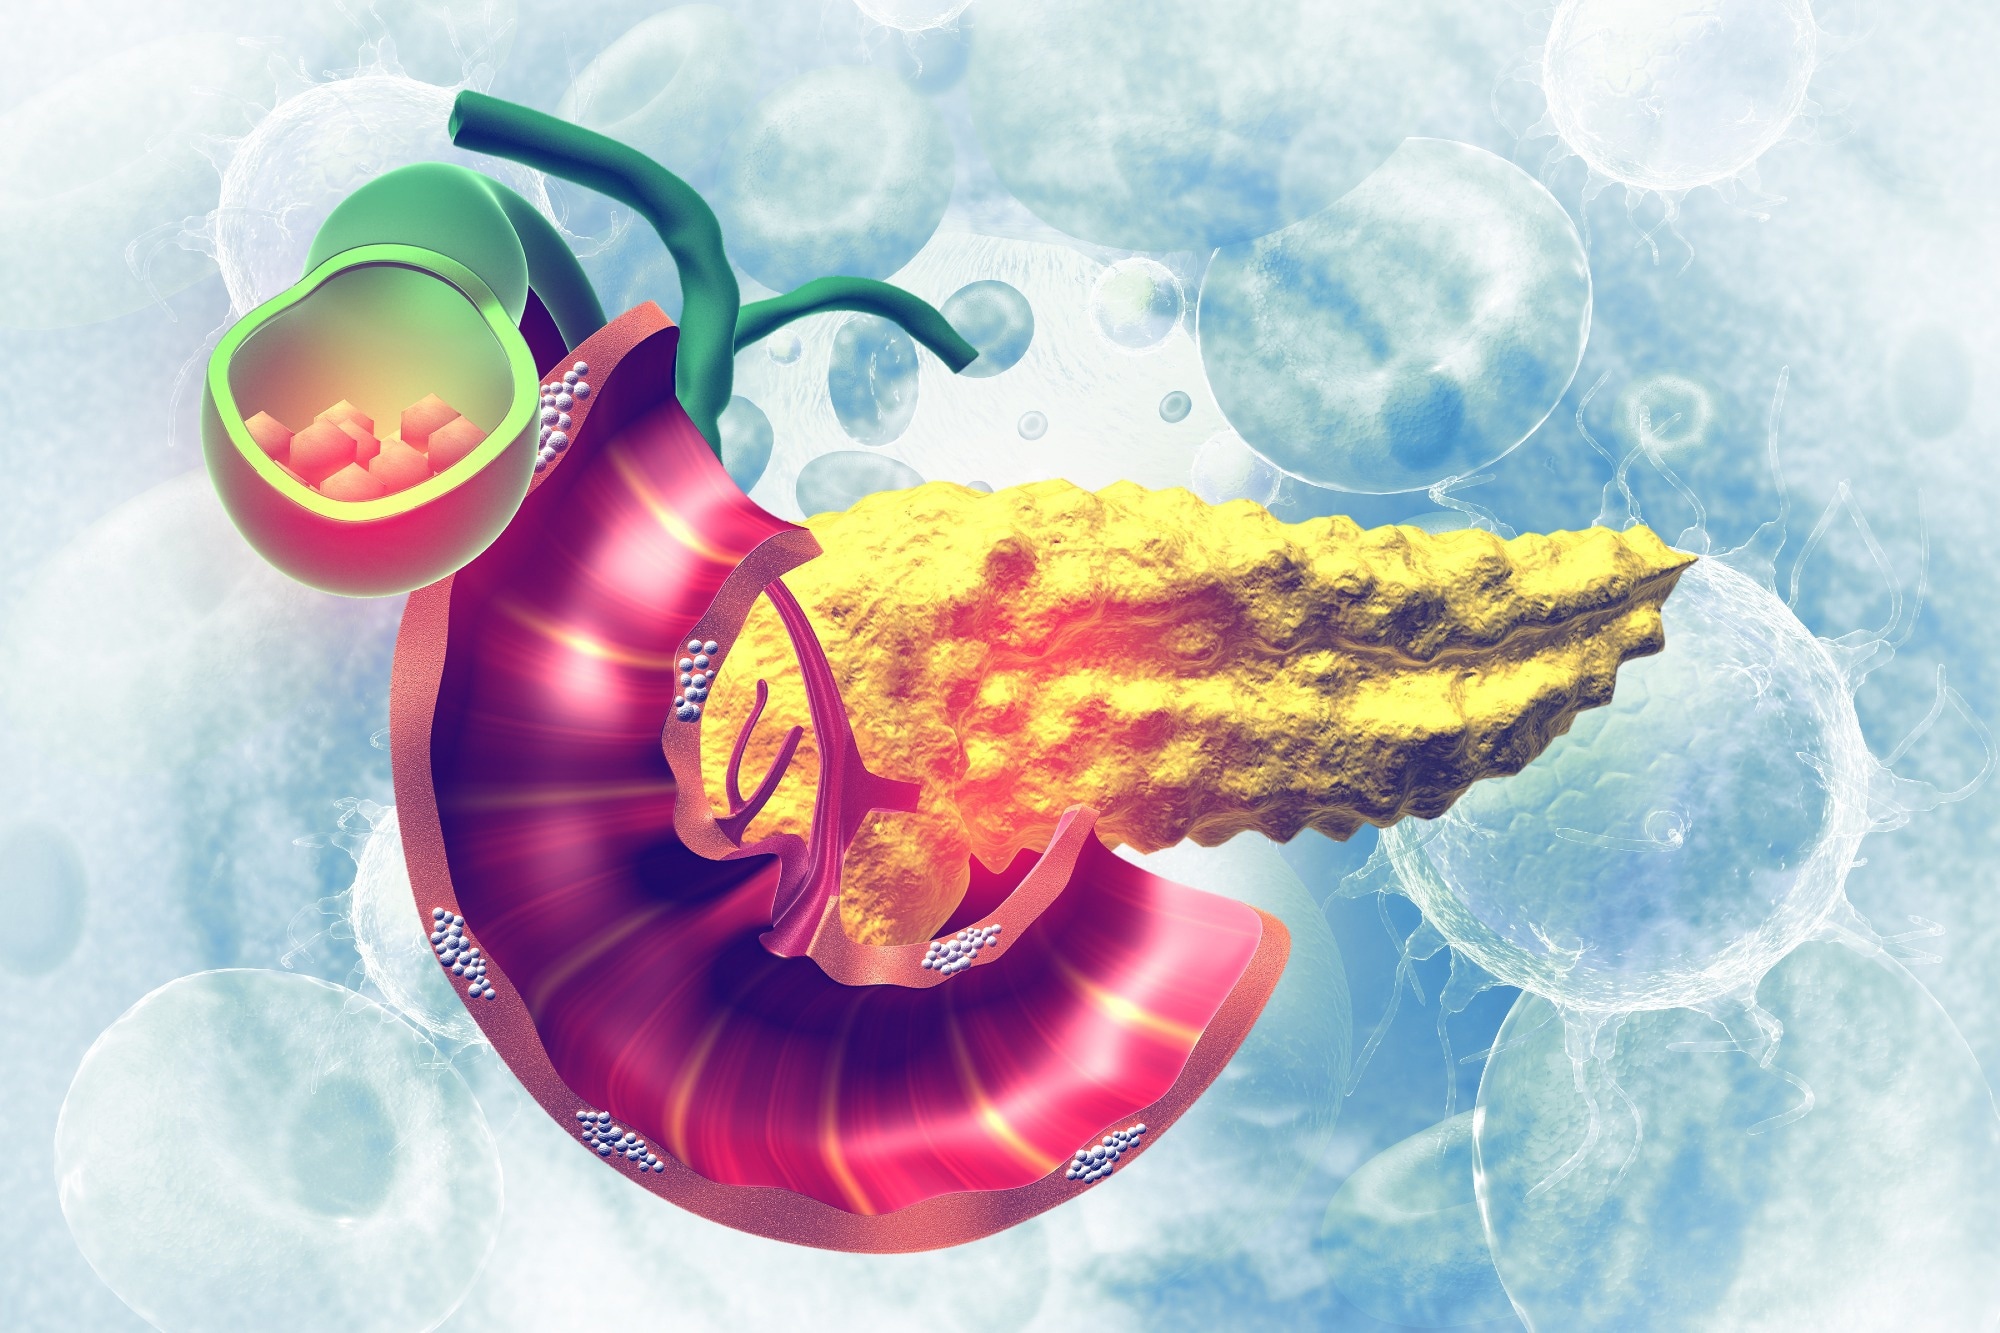 Study: Host Factor PLAC8 is Required for Pancreas Infection by SARS-CoV-2. Image Credit: crystal light / Shutterstock.com